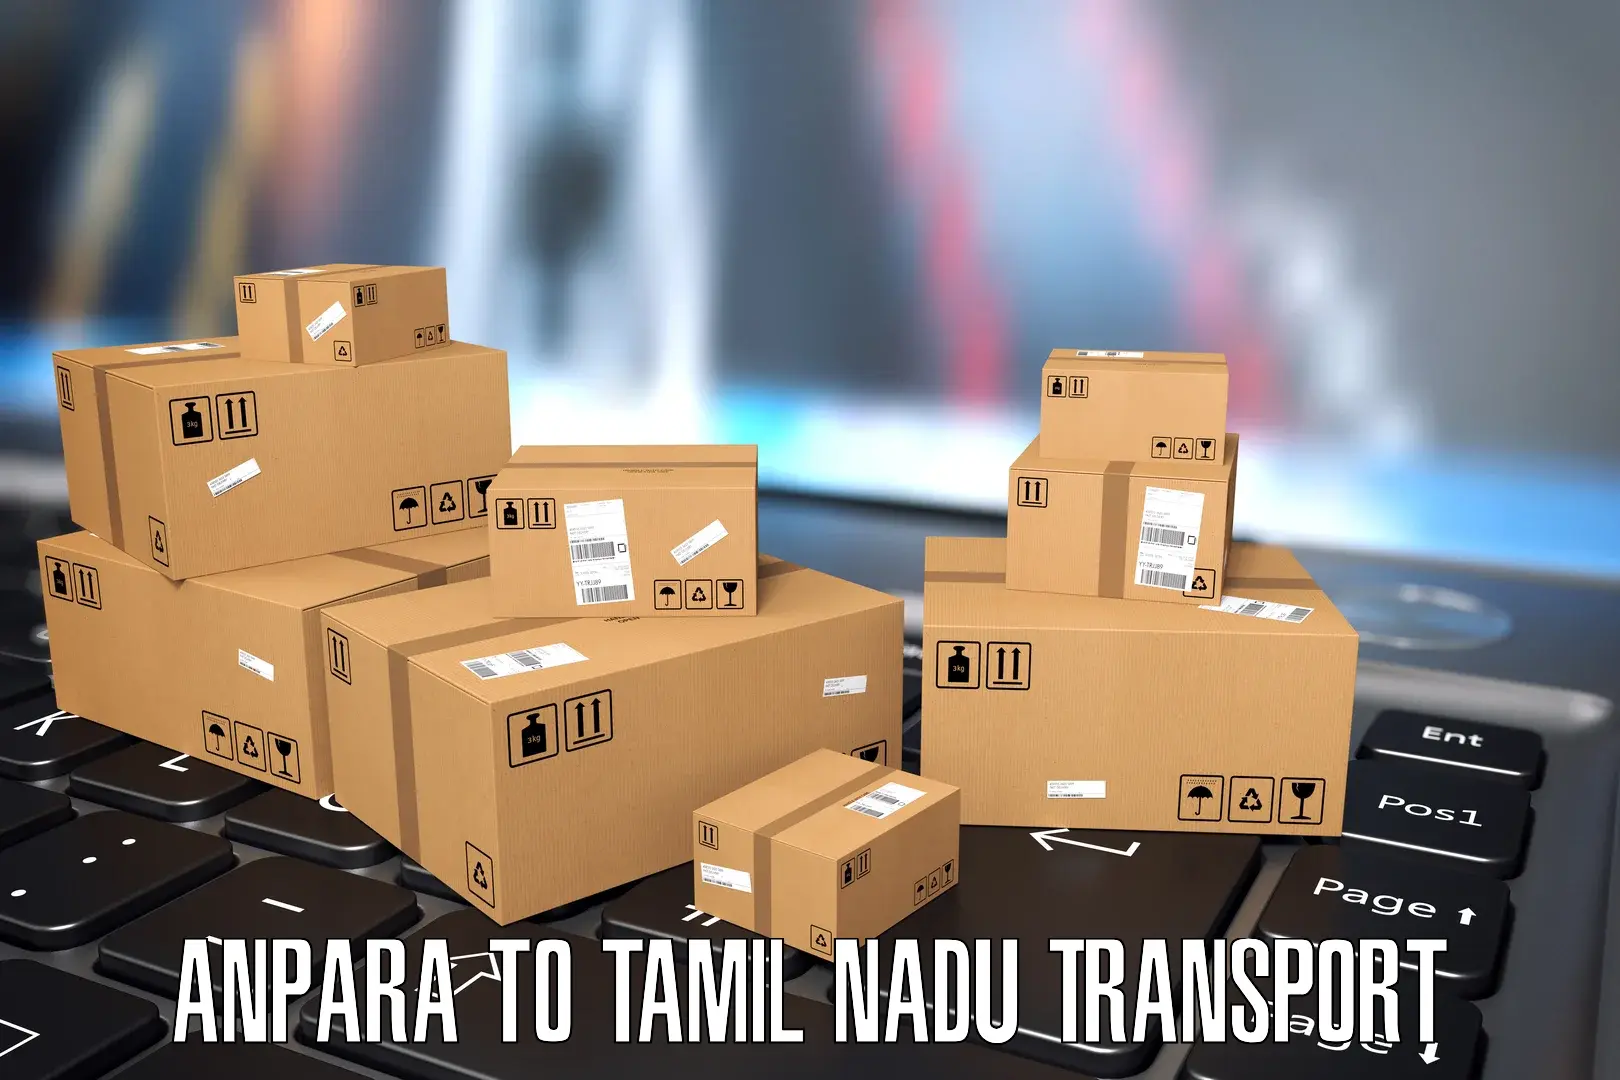 Shipping services Anpara to Sri Ramachandra Institute of Higher Education and Research Chennai